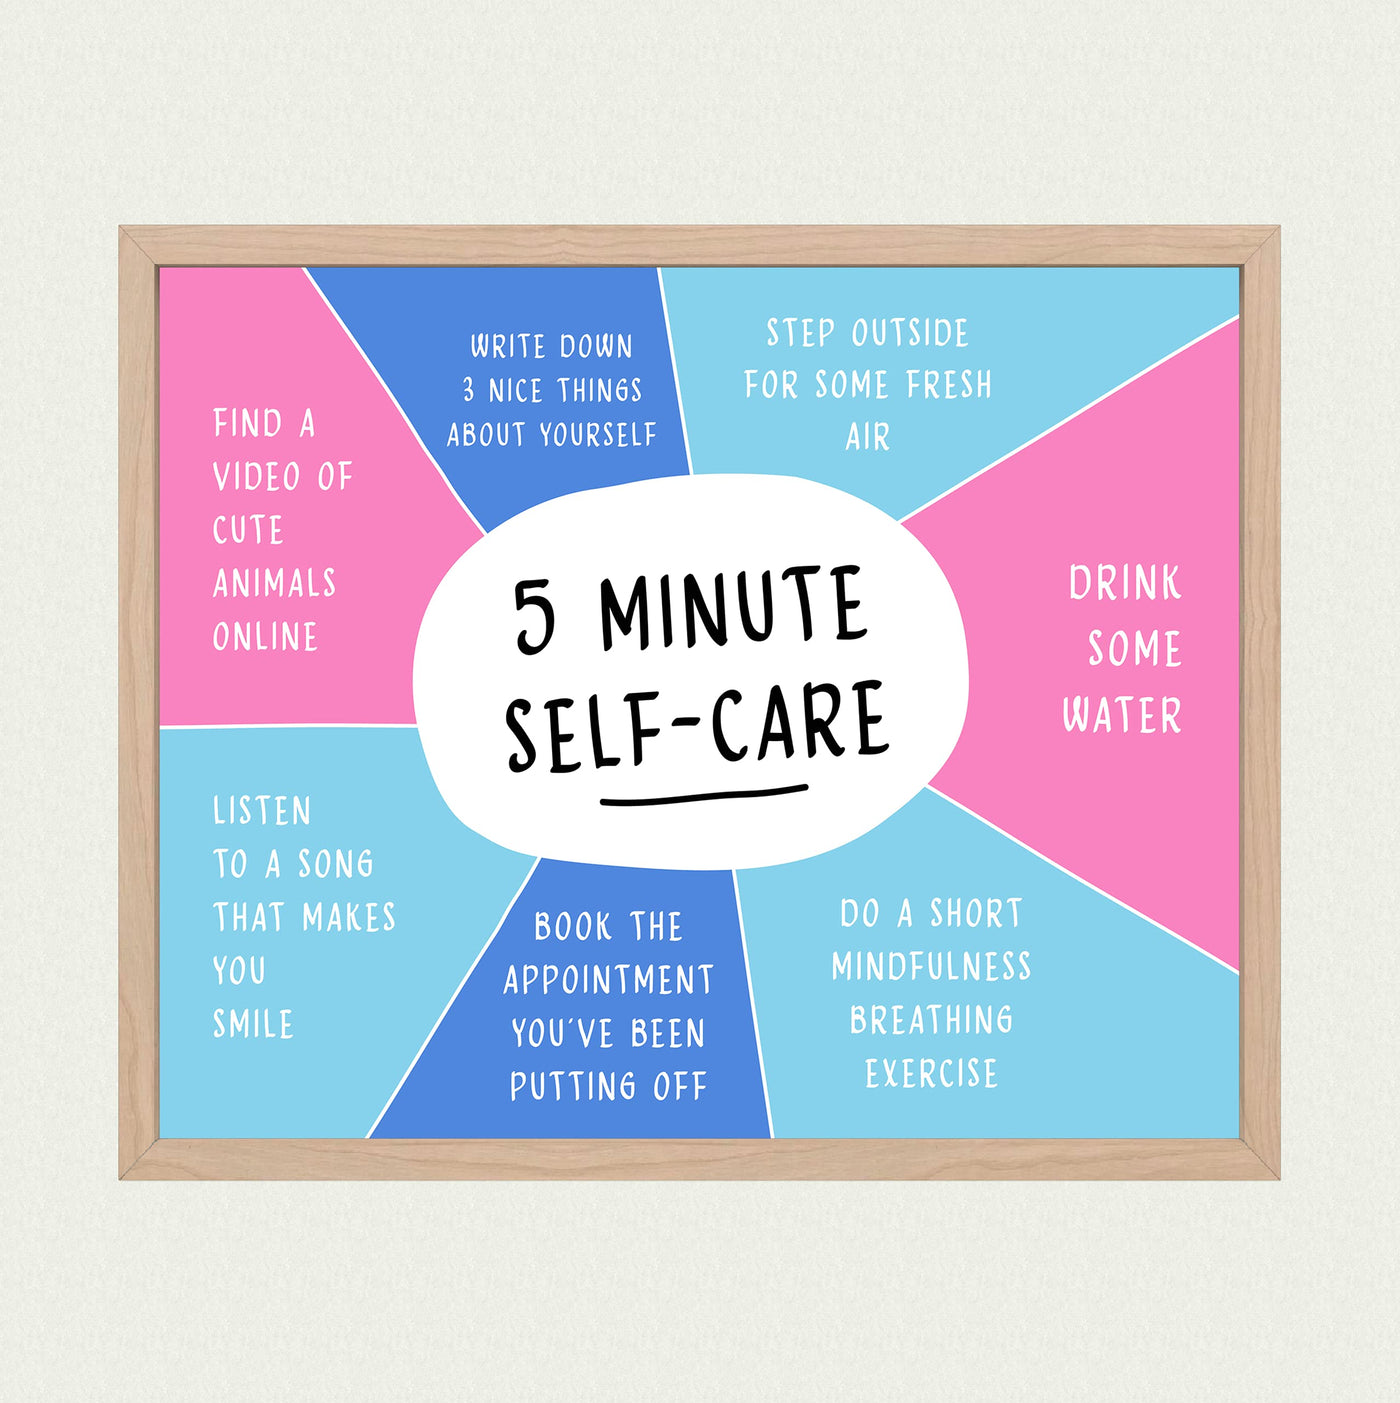 5 Minute Self-Care- Inspirational Quotes Wall Art Sign -10 x 8" Motivational Typographic Chart Print -Ready to Frame. Positive Home-Office-Studio-School-Dorm Decor. Great Gift for Inspiration!